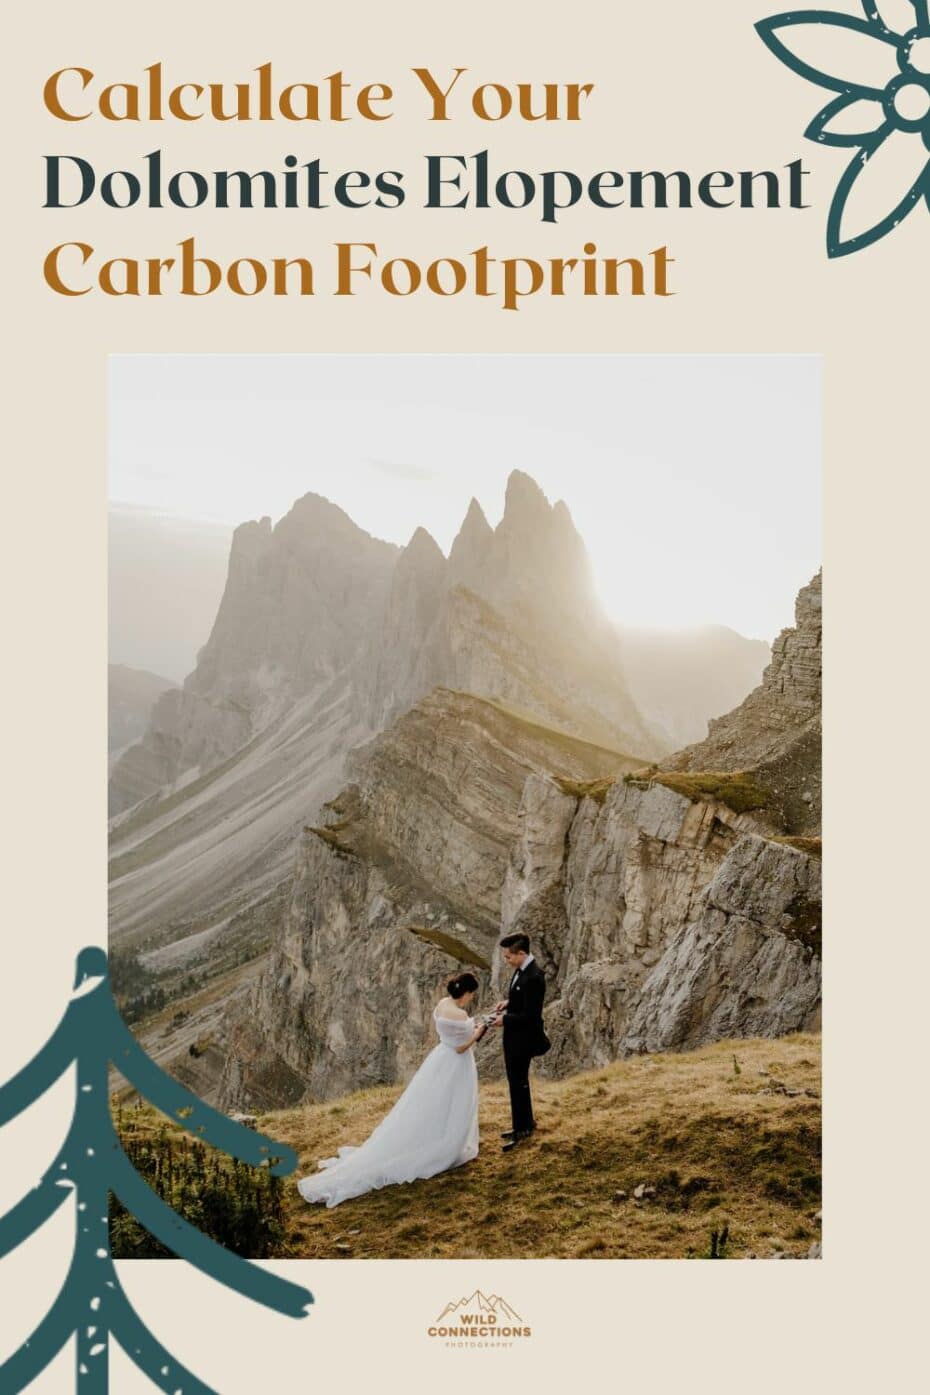 Calculate the carbon footprint of your Dolomites elopement